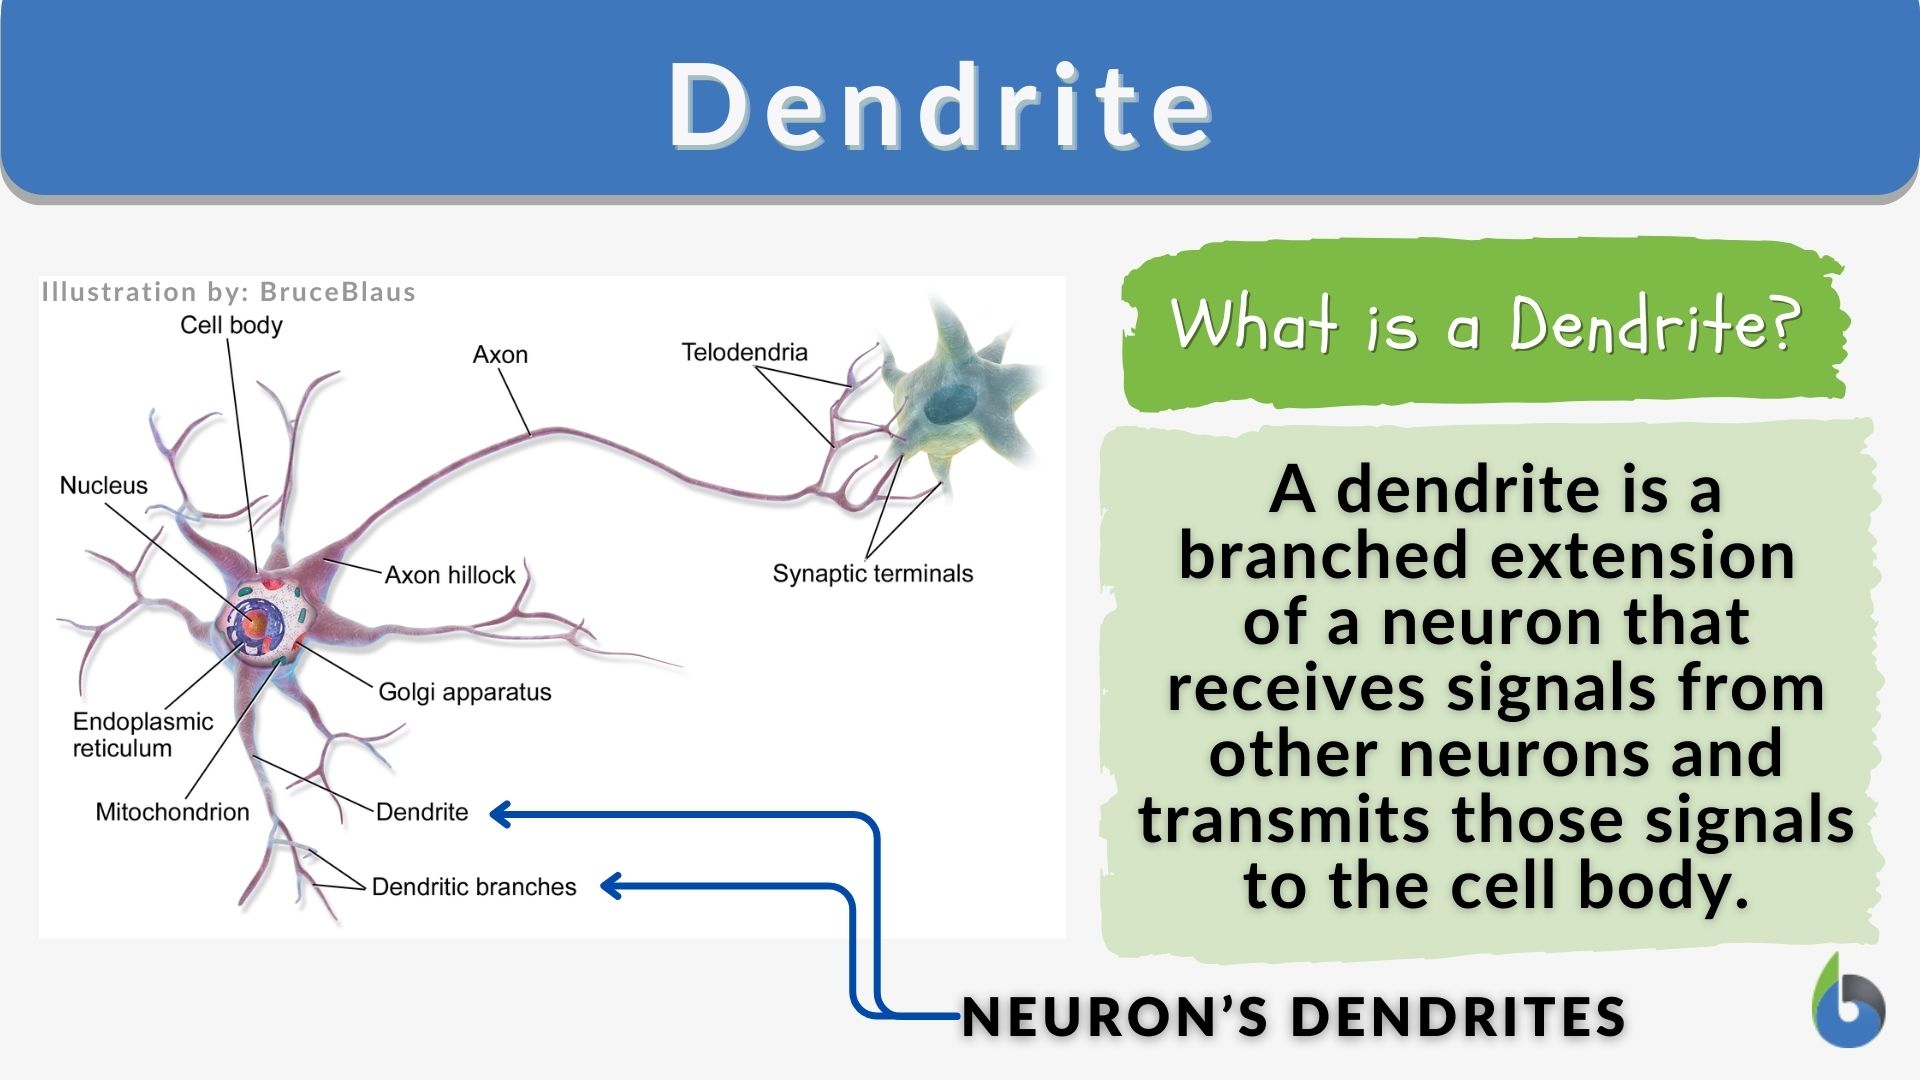 Dendrite - Definition and Examples - Biology Online Dictionary